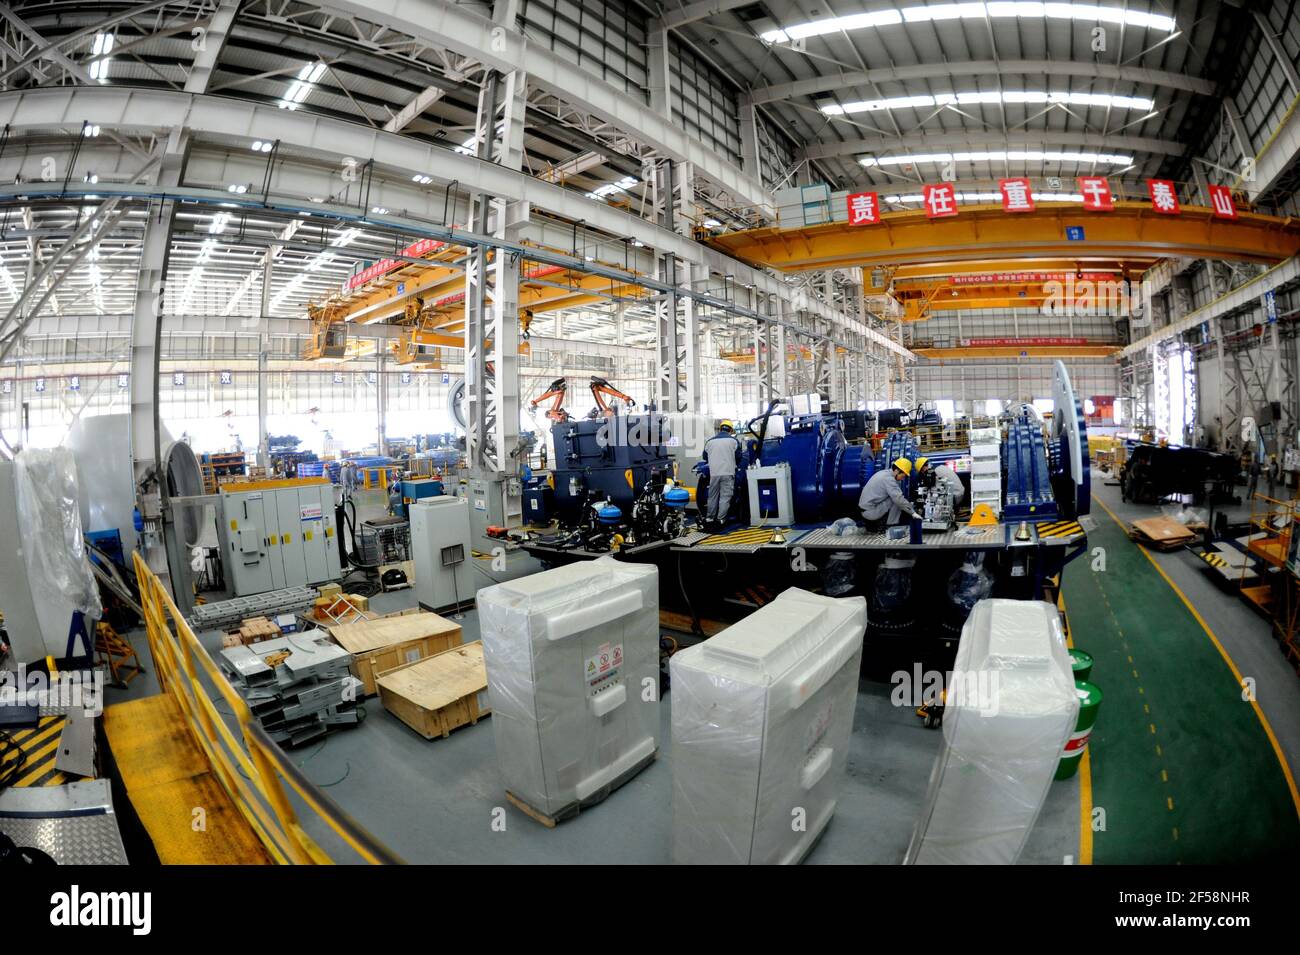 LIANYUNGANG, CHINA - MARCH 25, 2021 - Workers conduct a production operation at a production workshop of national  United Power Technology (Lianyungang) Co., Ltd in Lianyungang, Jiangsu province, China, March 25, 2021. national United Power Technology (Lianyungang) Co., Ltd. continues to carry out product upgrading and innovation, and invests in R&D, manufacturing, sales and commissioning projects of 8-15MW offshore wind turbine and 3.X-5.X onshore large wind turbine. Up to now, the output has increased by 92% compared with the same period last year. (Photo by Wang Chun / Costfoto/Sipa USA) Stock Photo